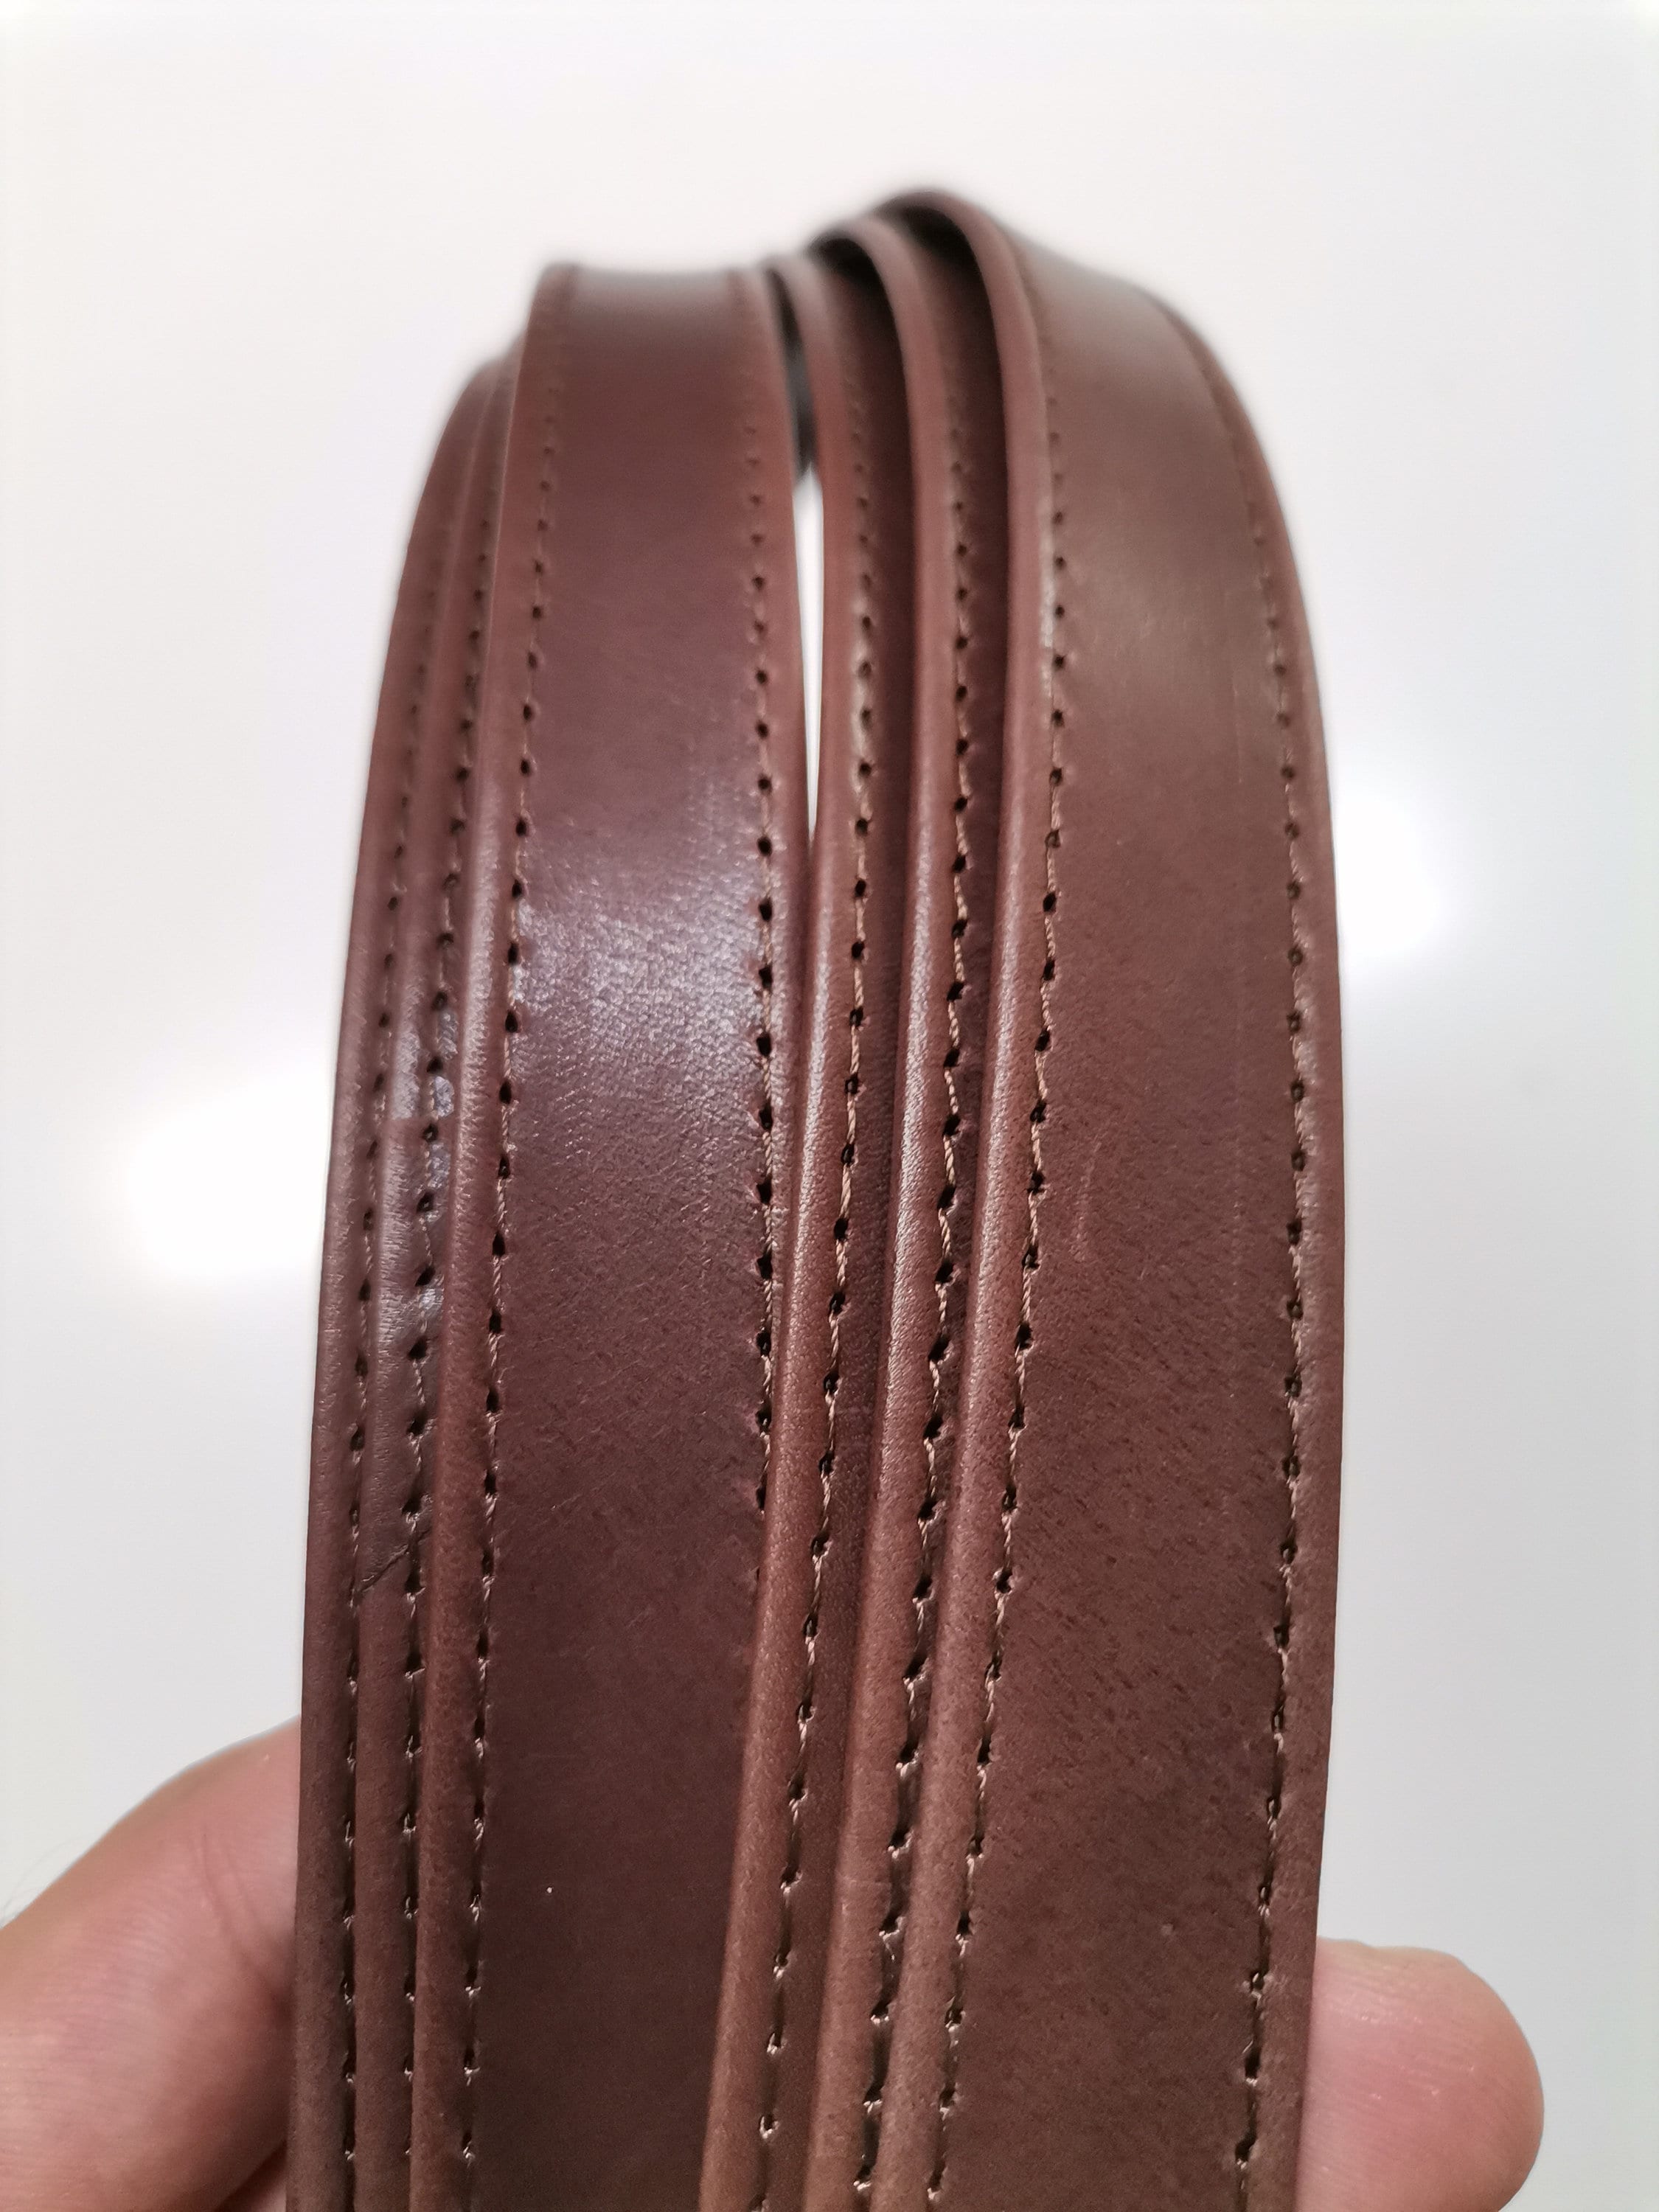 Replacement stripped slim handbag strap in dark brown and tan brown with 1  width